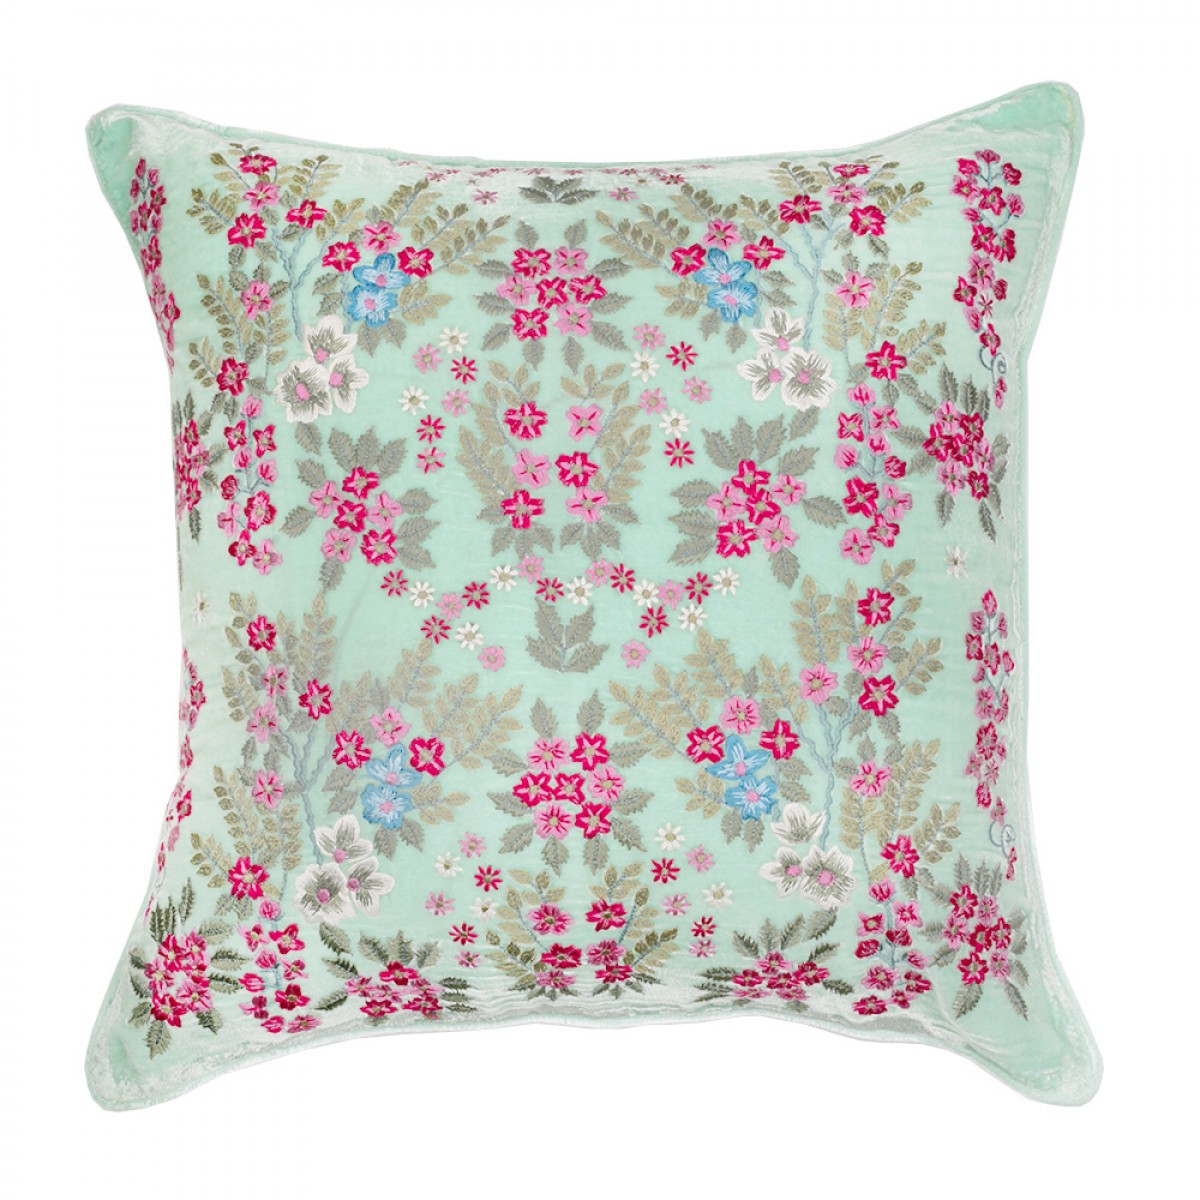 Designer Embroidered Cushion Cover - Waterfall